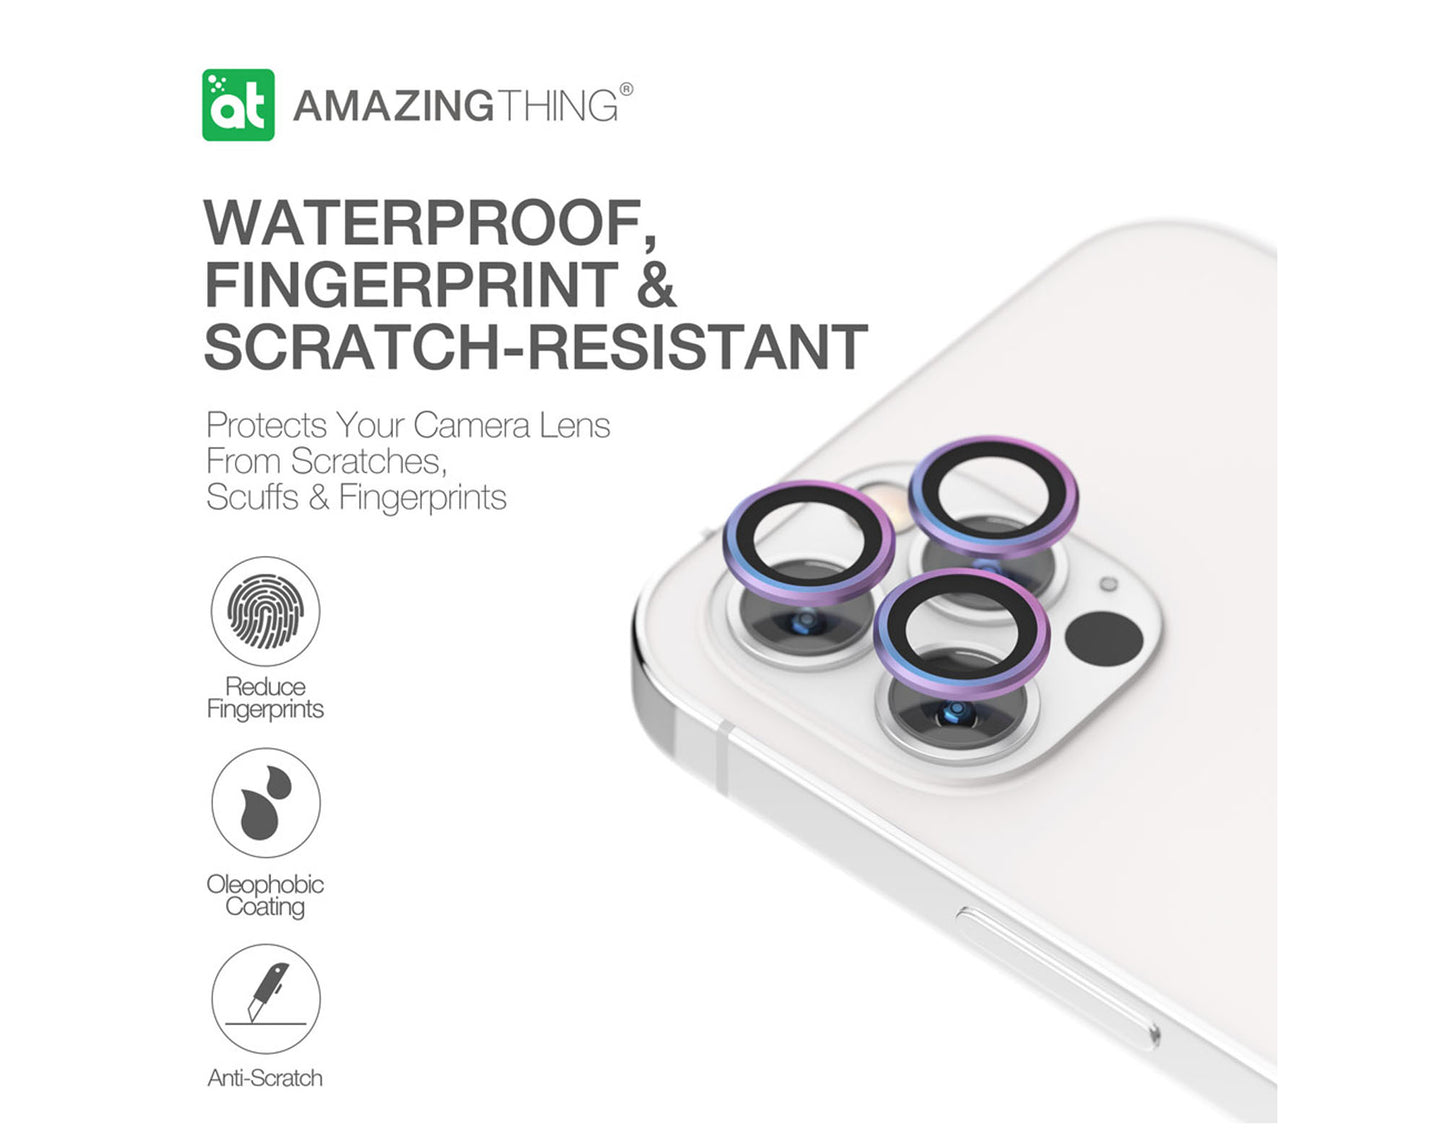 AmazingThing SUPREME AR 3D Lens Protector for iPhone 12 Pro - 3 pcs - Grey (Barcode: 4892878062916 )